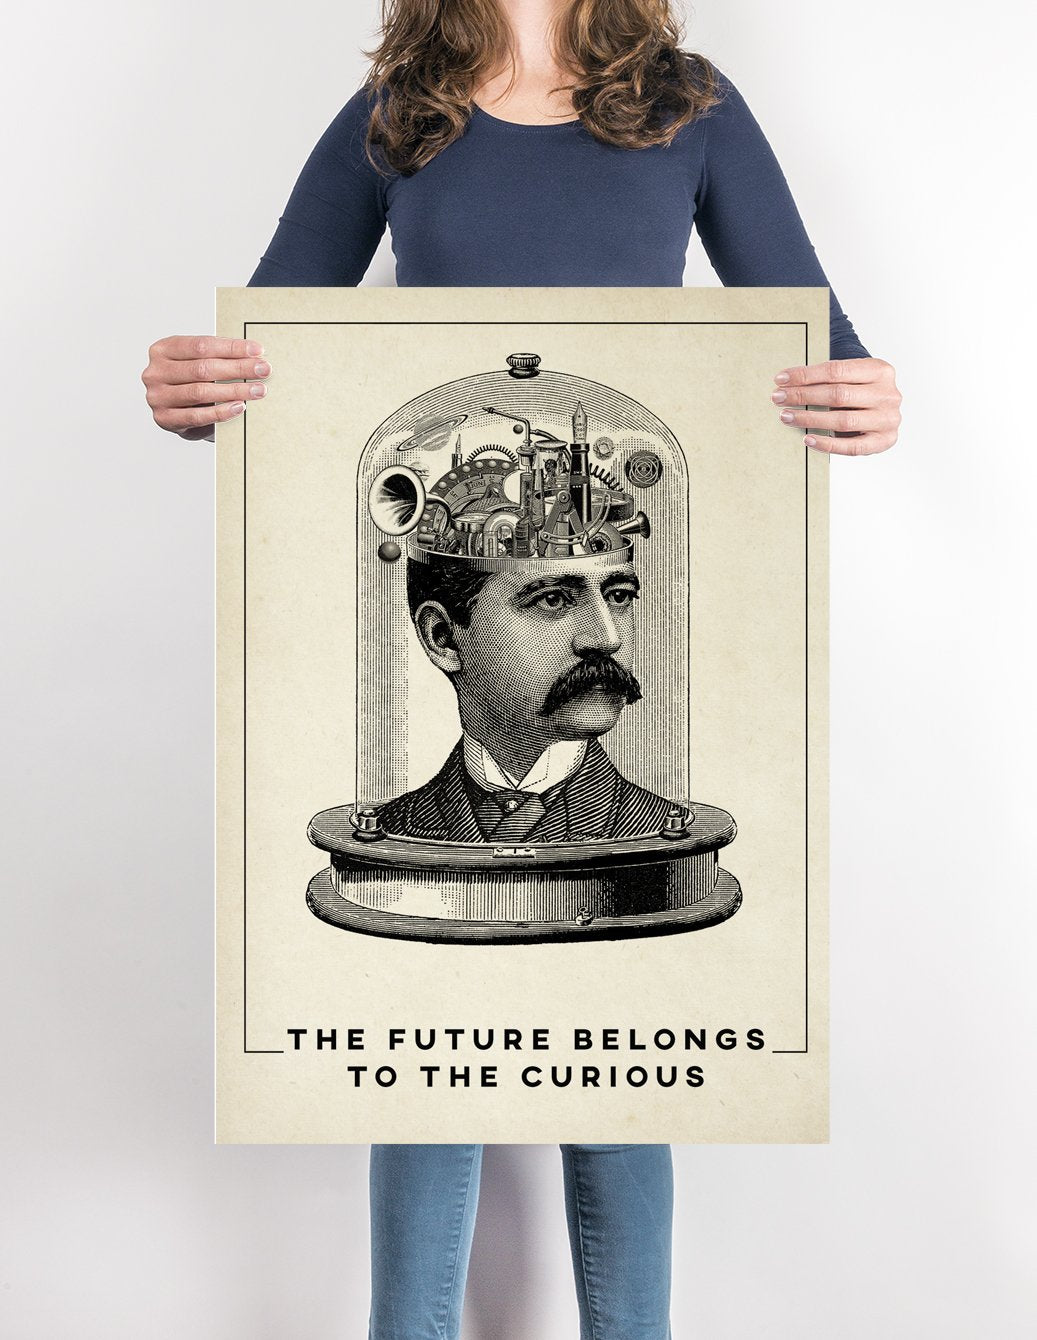 The Future Belongs to the Curious